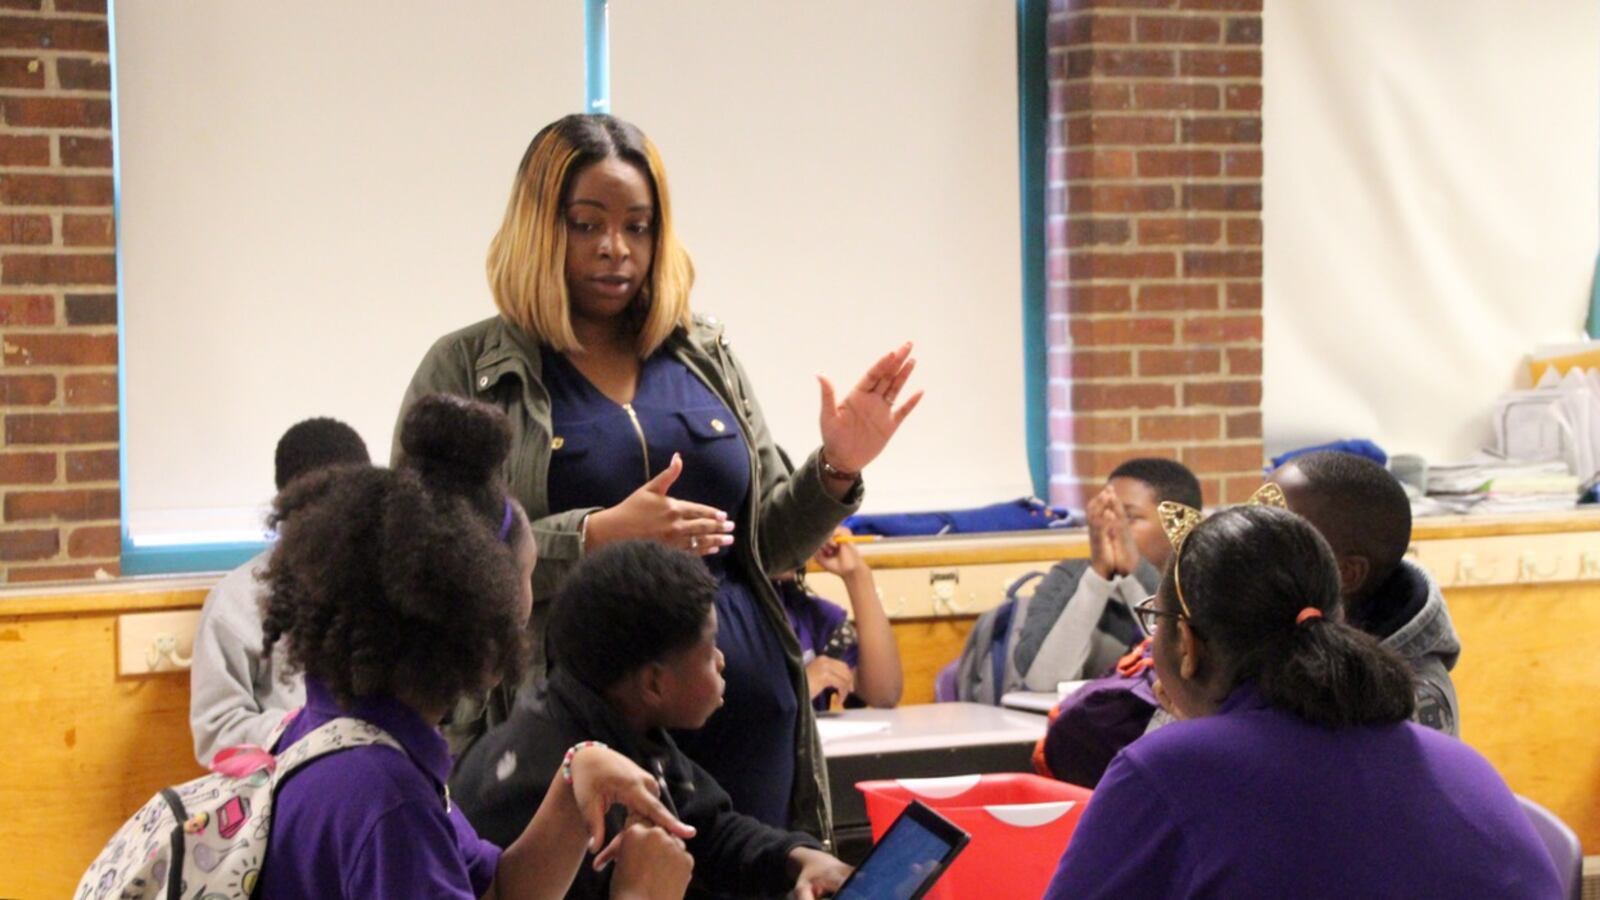 Yomyko Clark, in her first year of teaching at Aspire Hanley Middle School, says she has taught several game-based math lessons throughout the year.